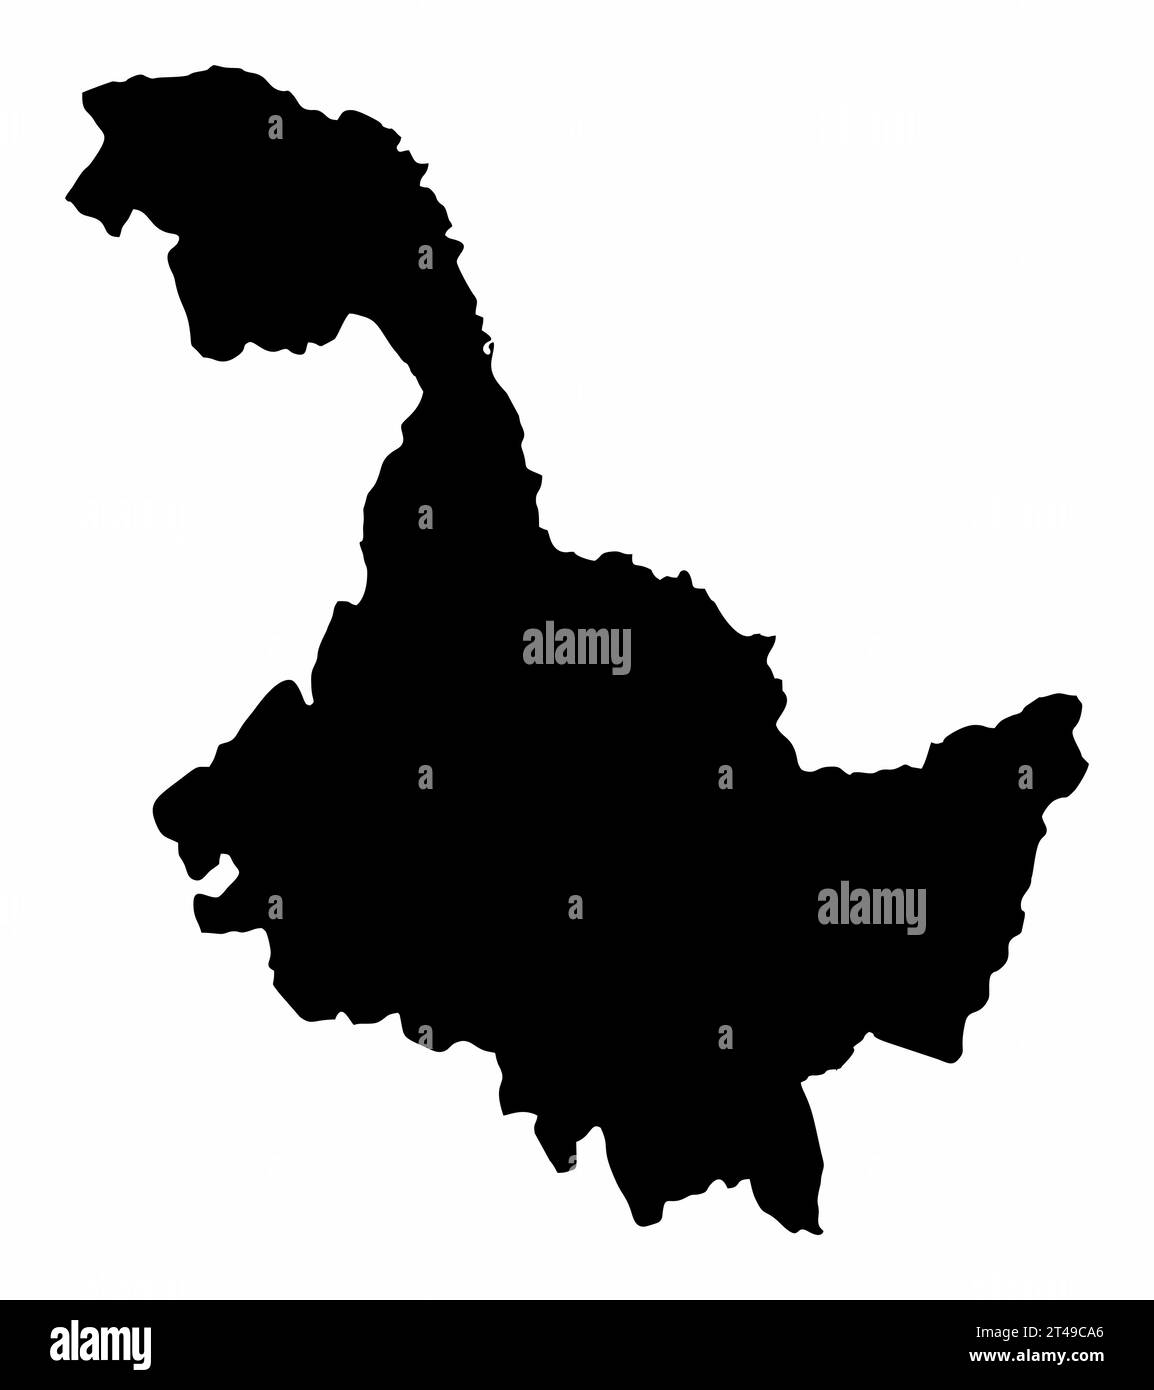 Heilongjiang Province map silhouette isolated on white background, China Stock Vector